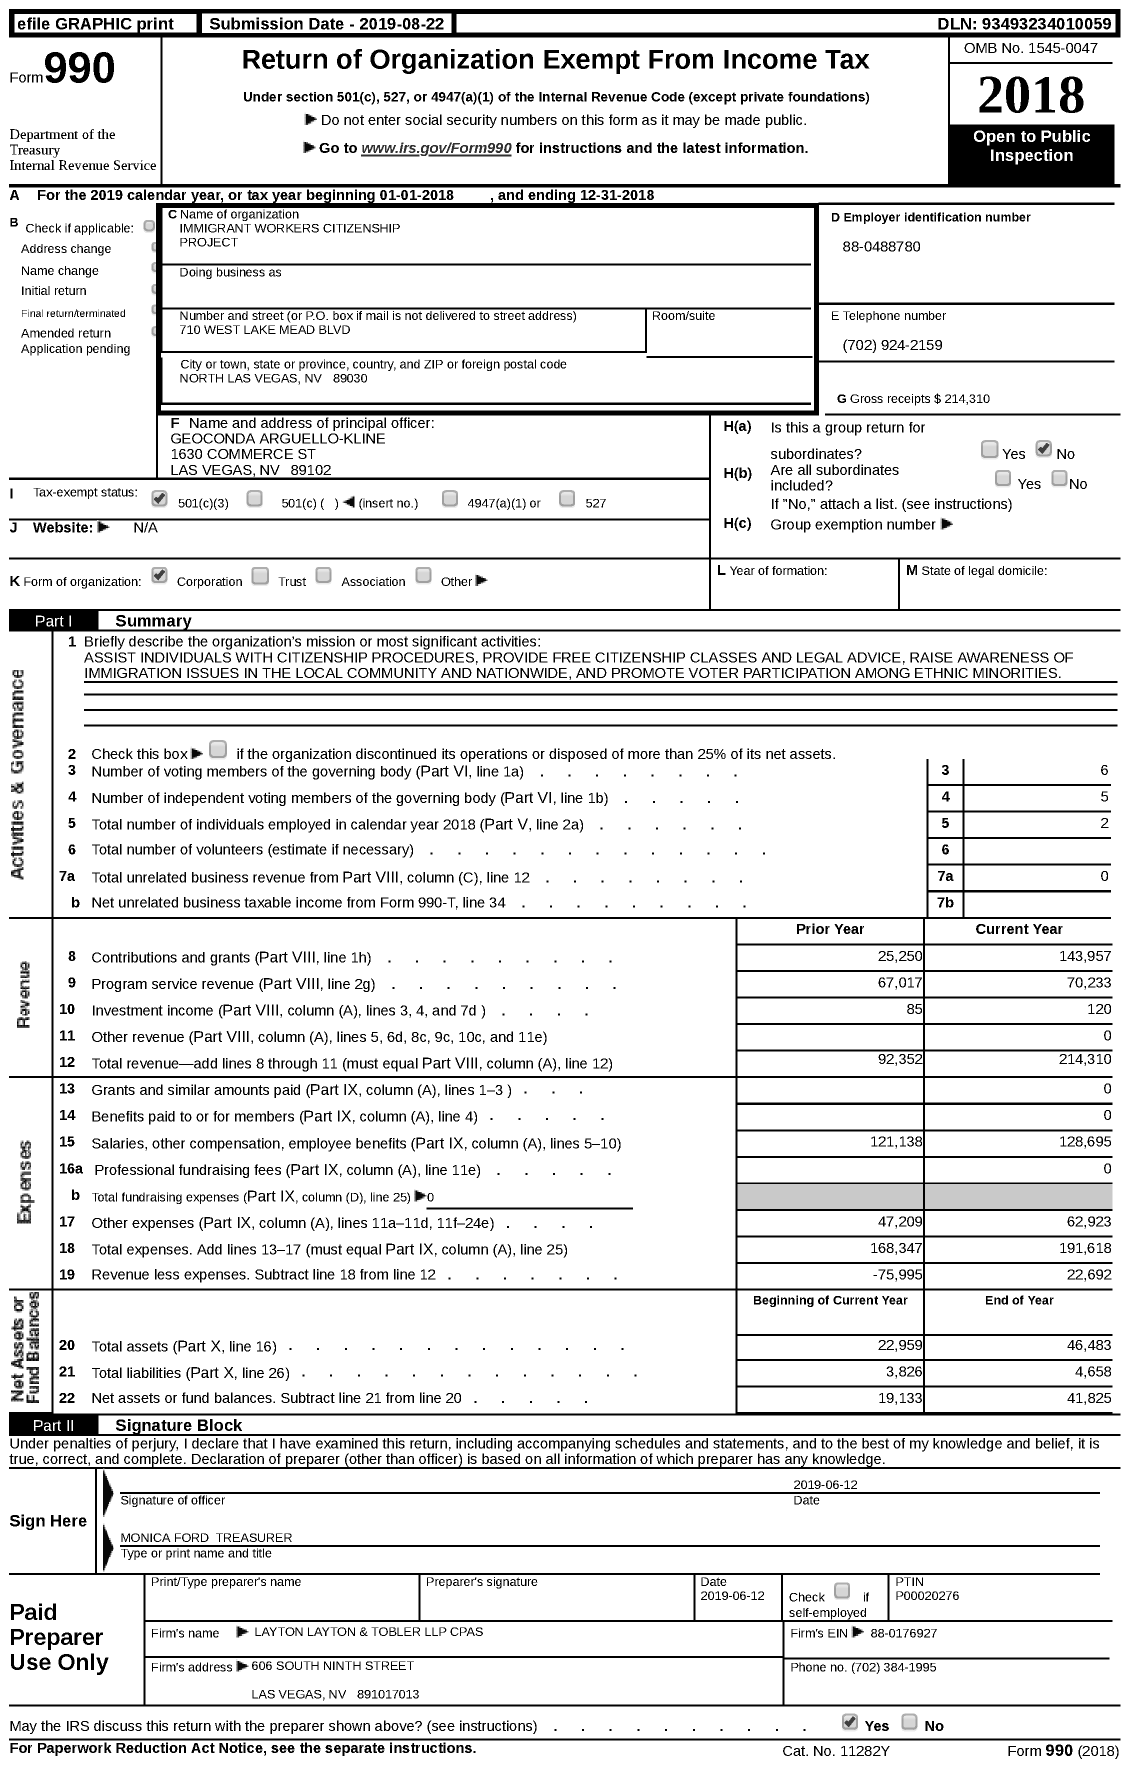 Image of first page of 2018 Form 990 for Immigrant Workers Citizenship Project